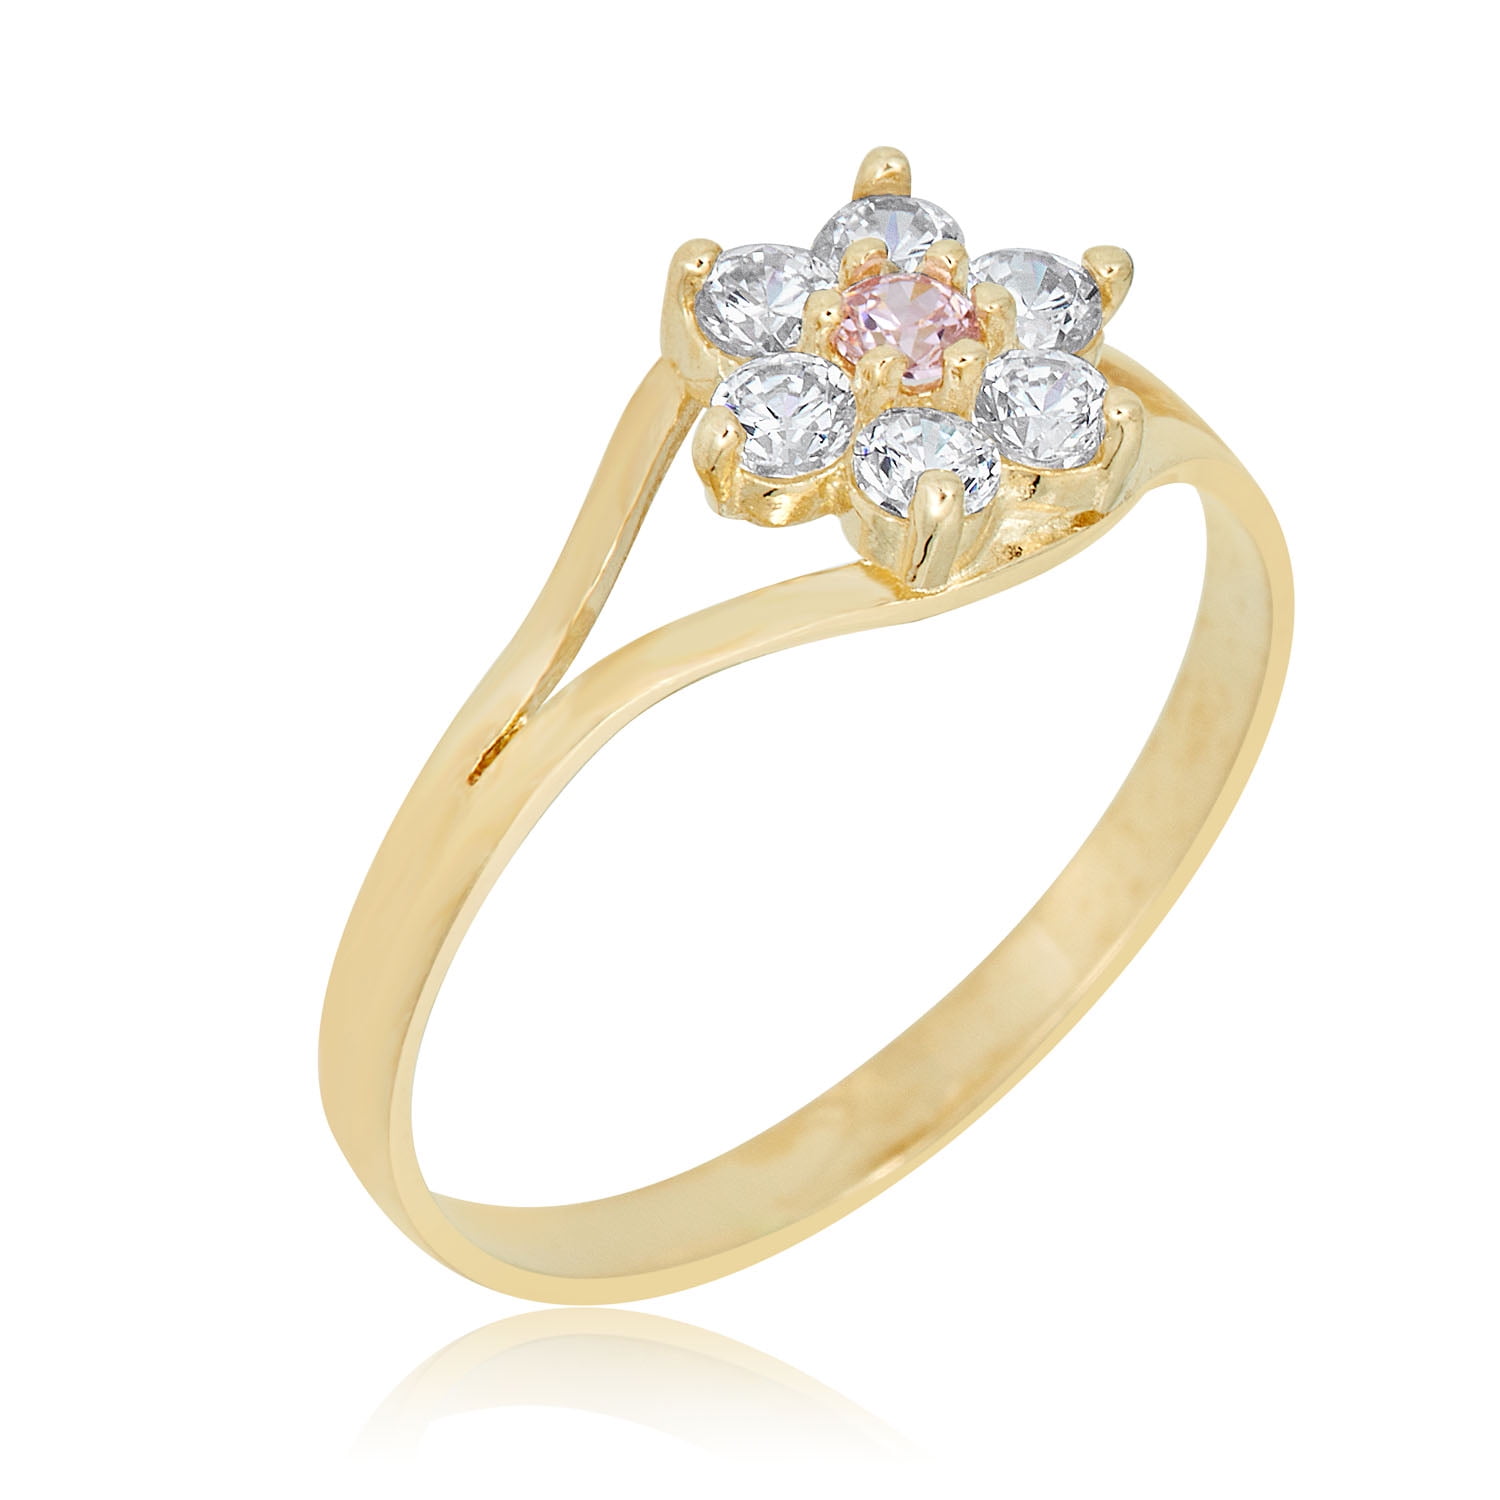 Details about   10K Yellow Gold Cubic Zirconia CZ Scallop Fashion Ring